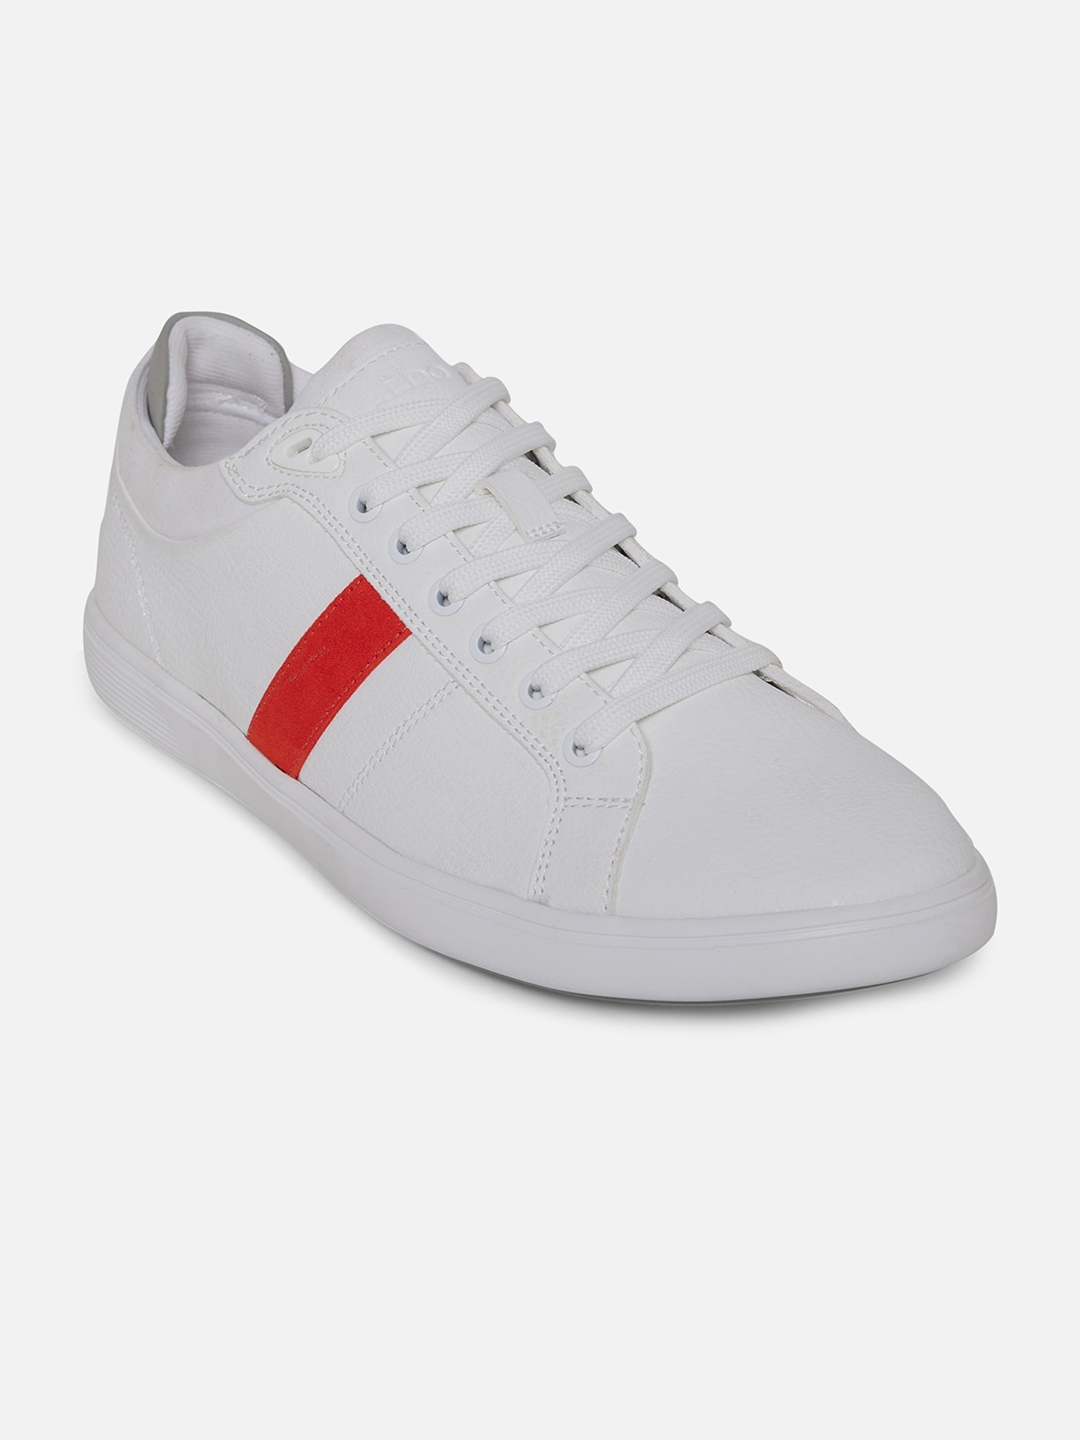 Buy Aldo Men White And Red Colourblocked Sneakers Casual Shoes For Men